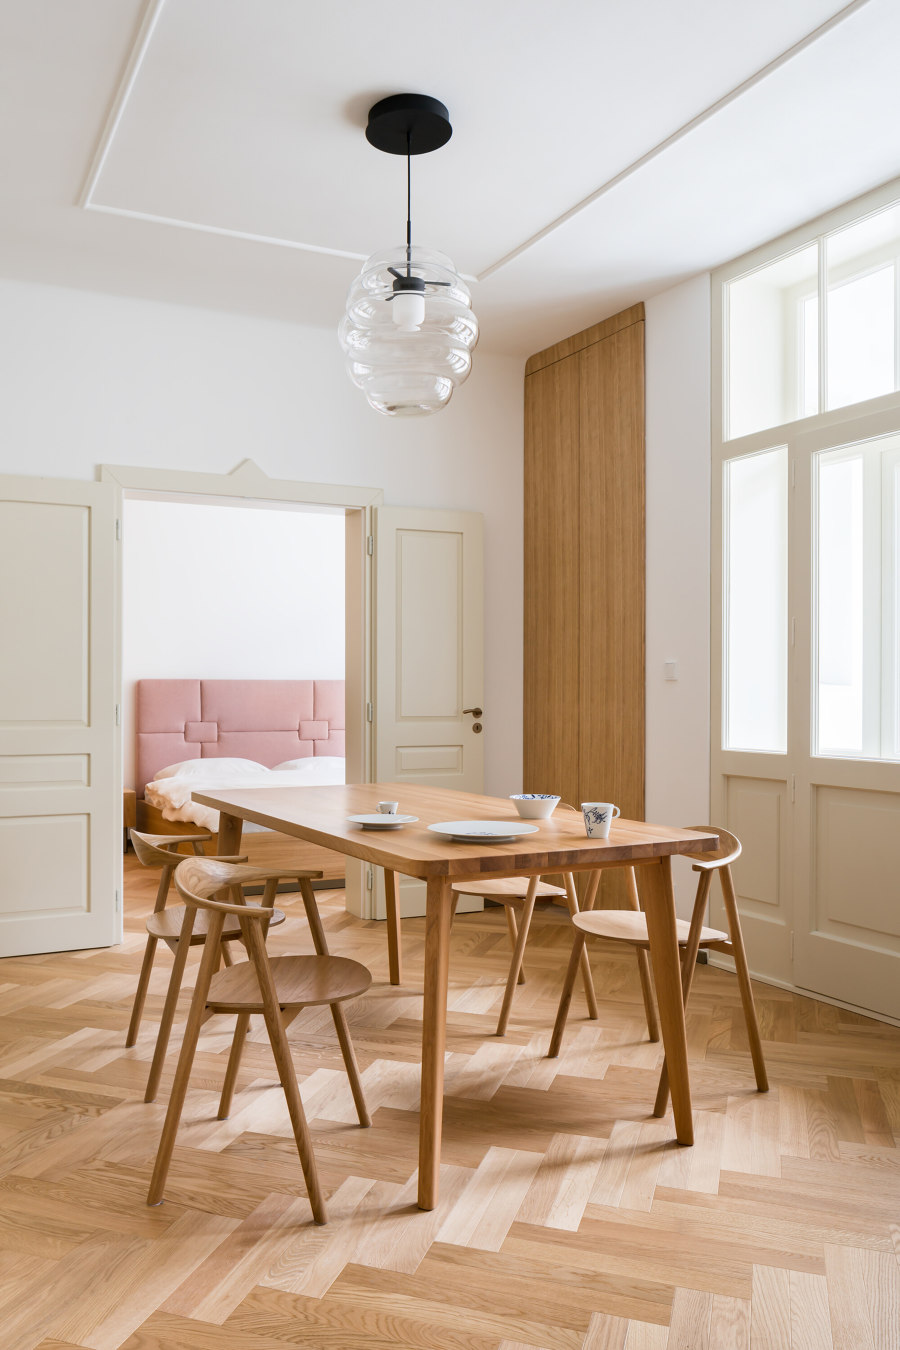 With Gracefulness from Dejvice by No Architects | Living space